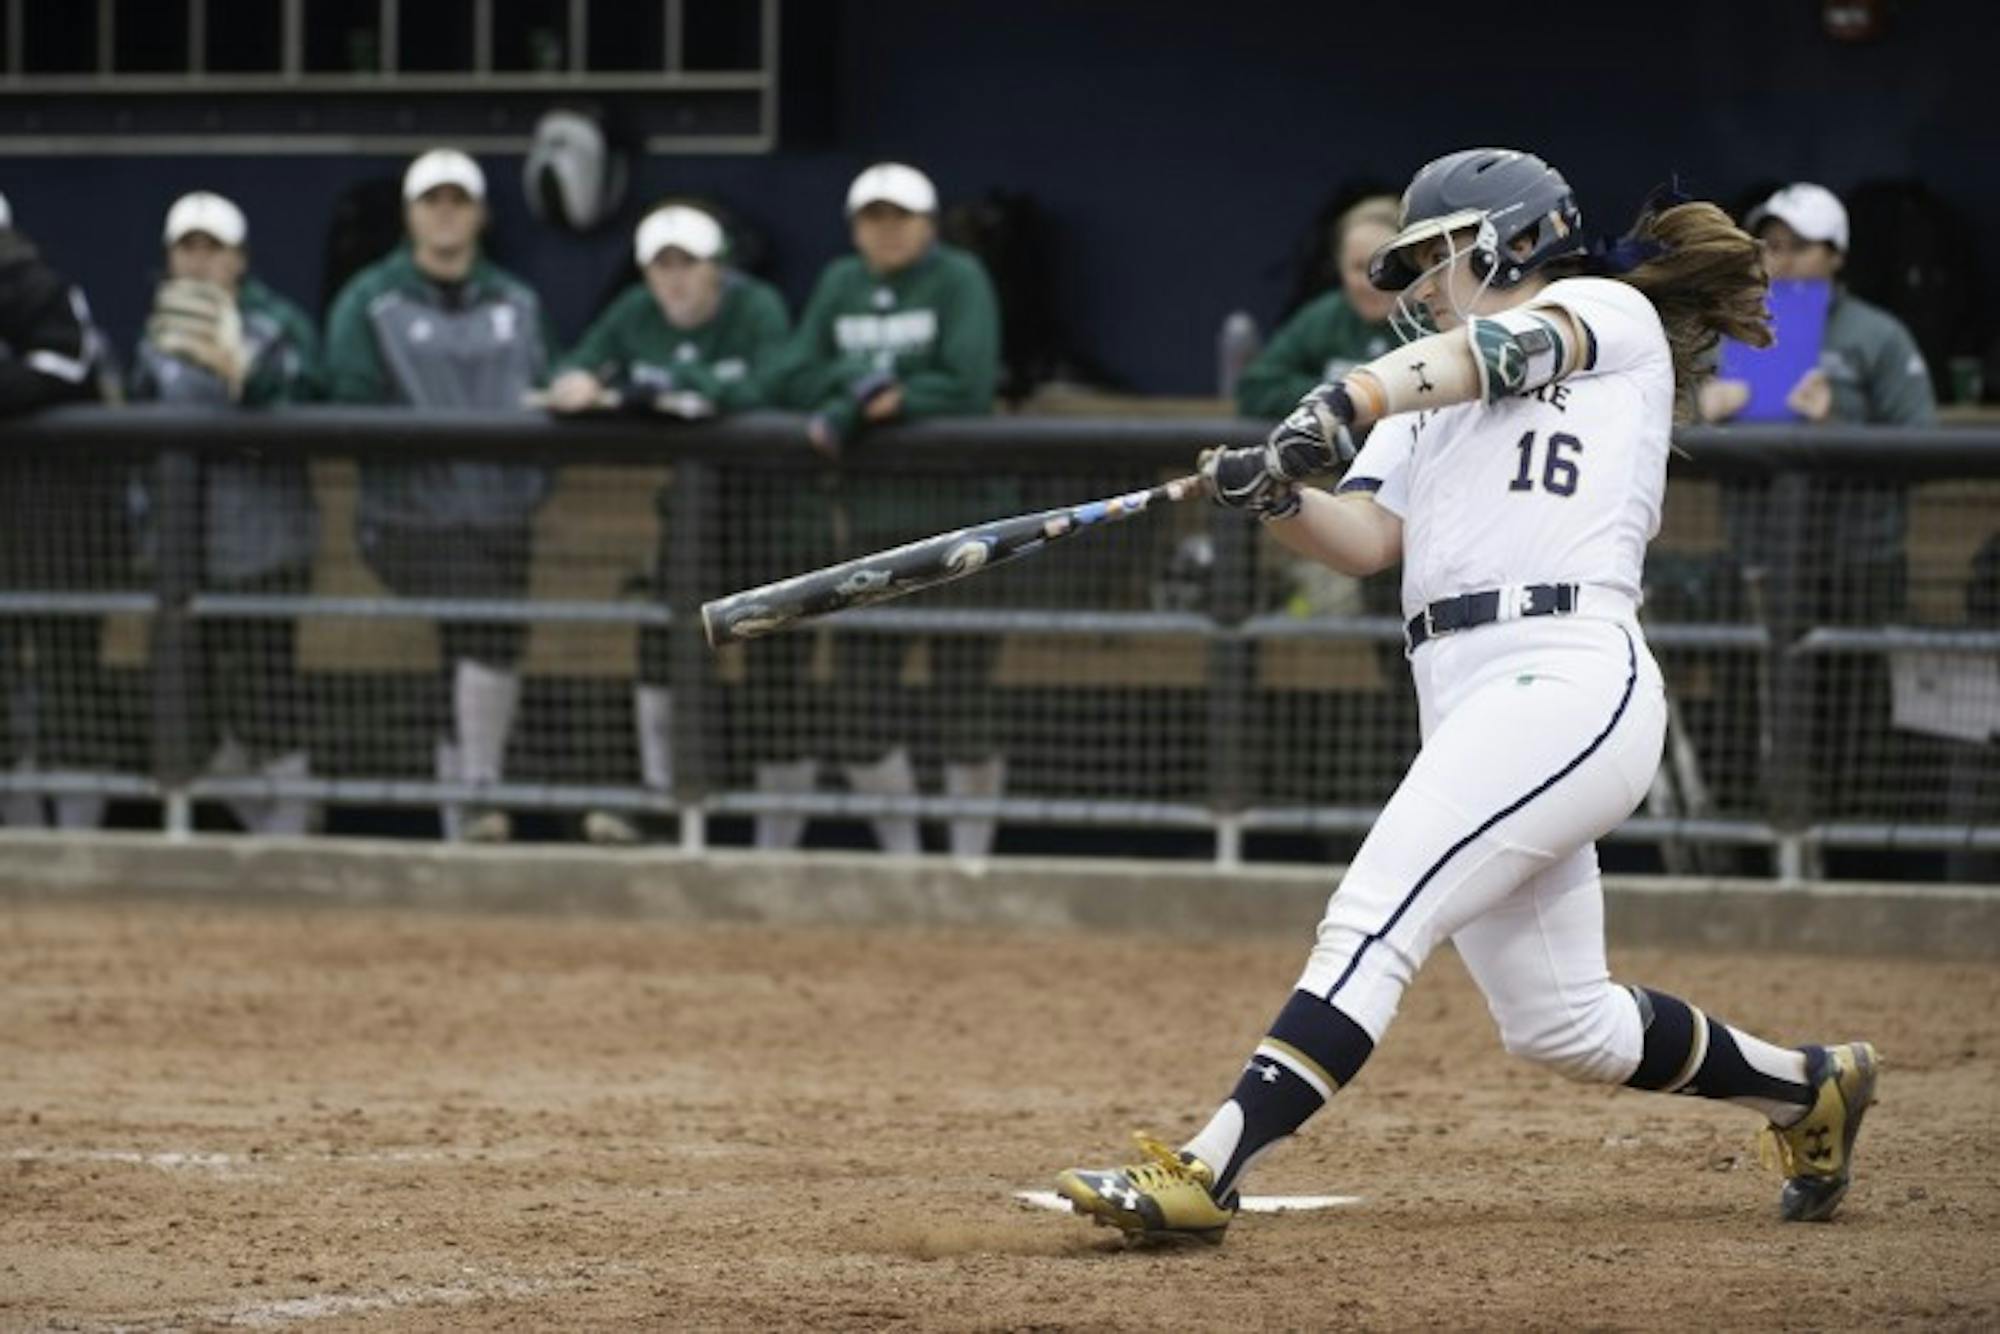 Irish sophomore infielder Caitlyn Brooks swings at a pitch during Notre Dame's 1-0 win over Eastern Michigan on March 29 at Melissa Cook Stadium.